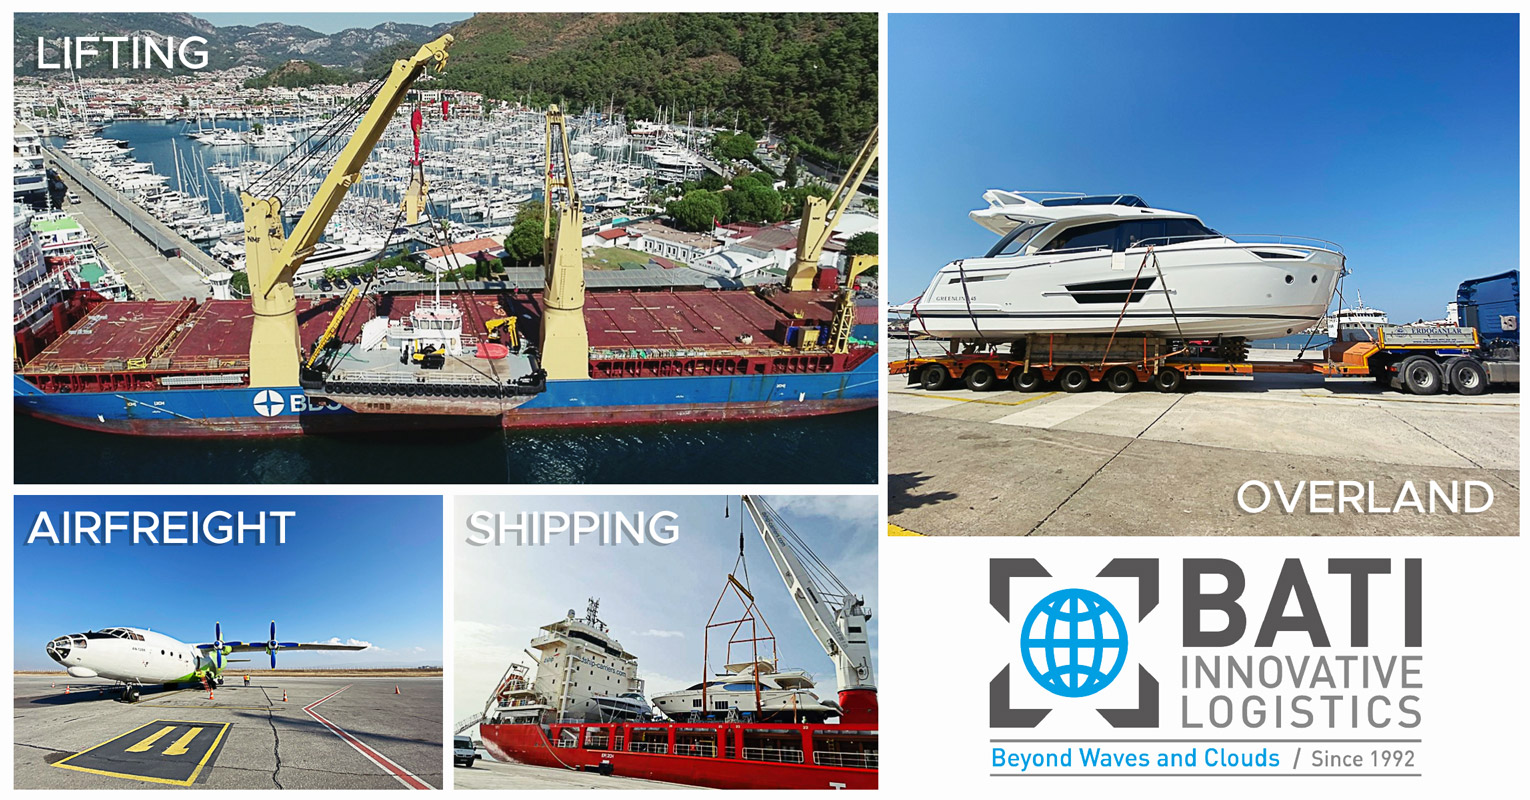 Vote for member Bati Innovative Logistics in the Heavy Lift Photo and Video Competition